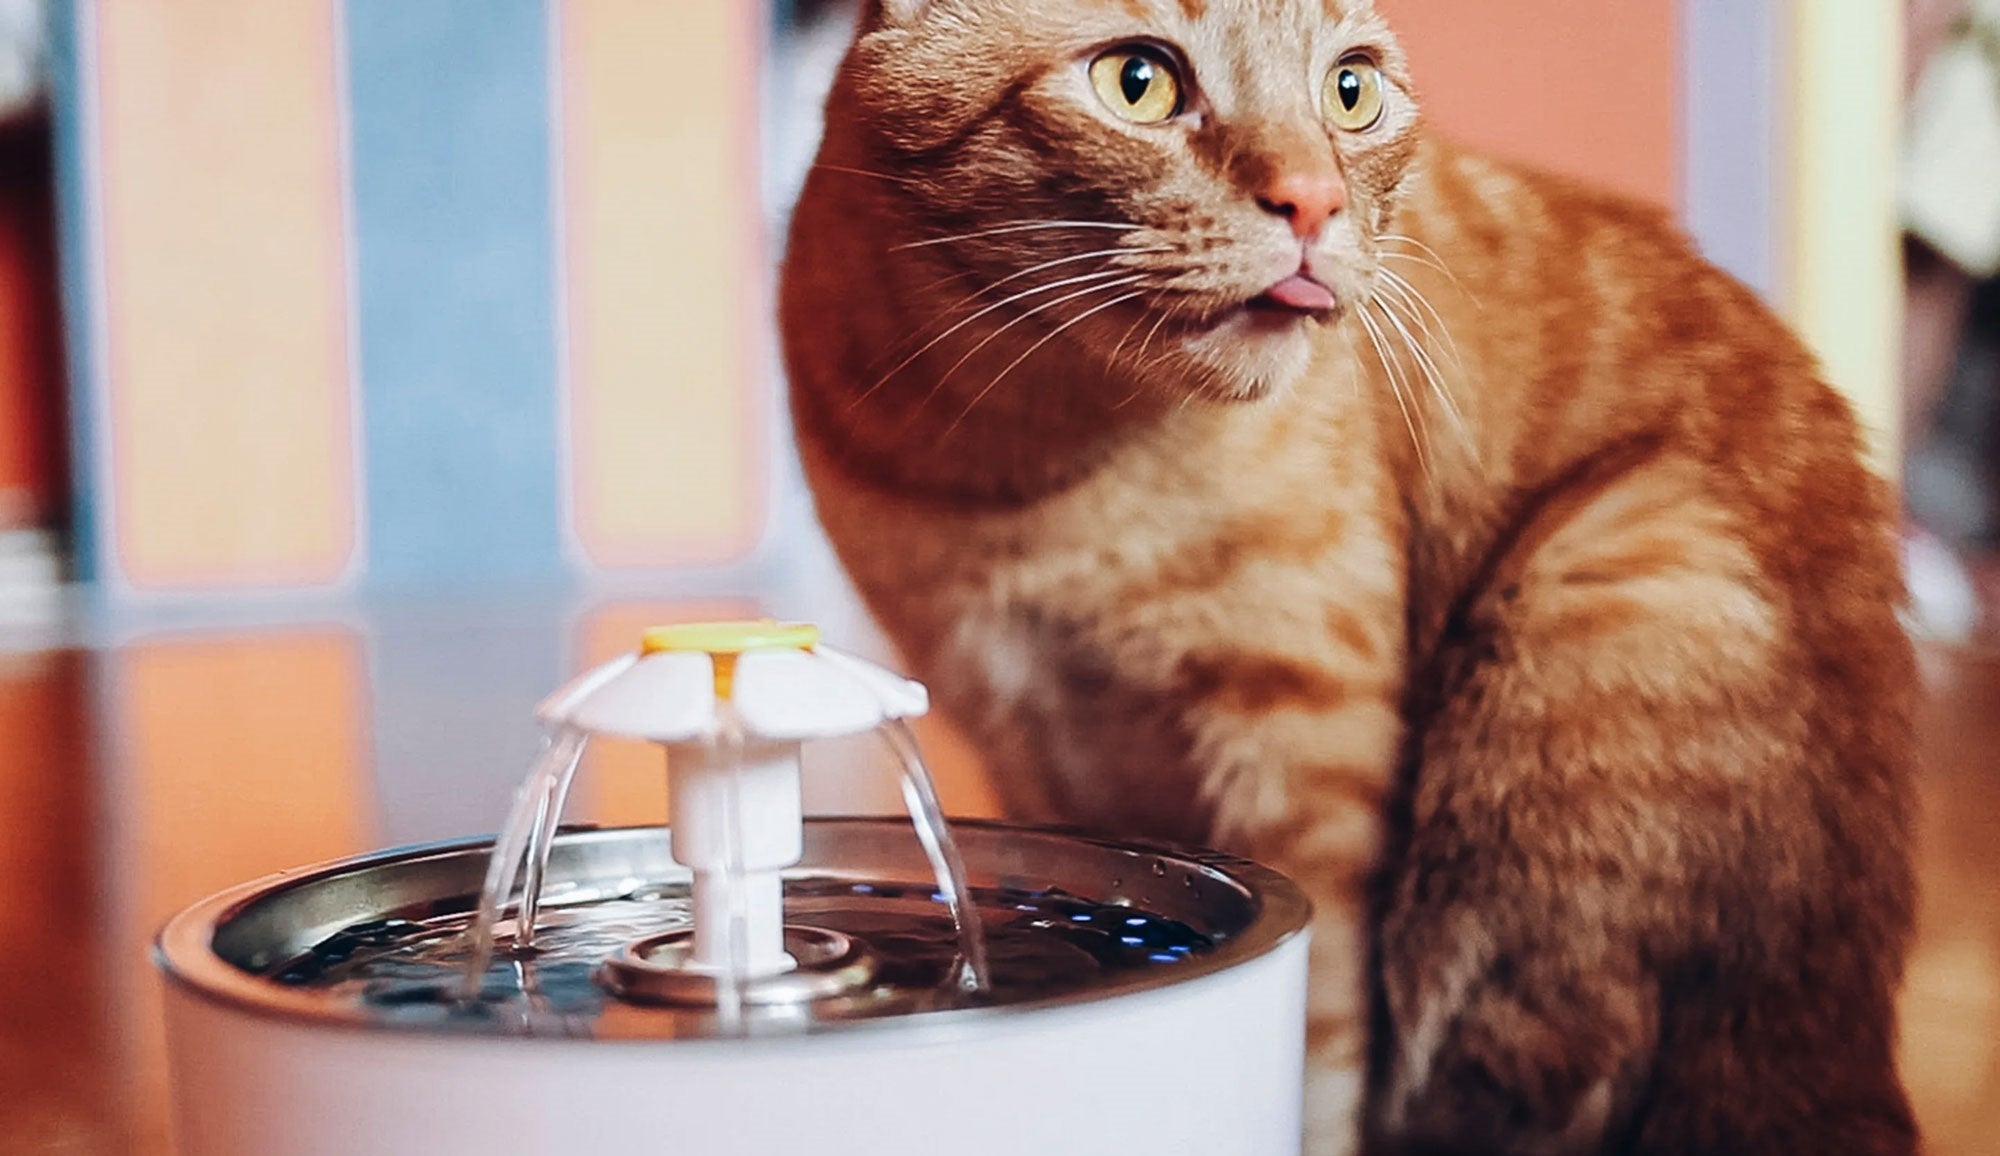 Why Do Cats Need a Drinking Fountain?